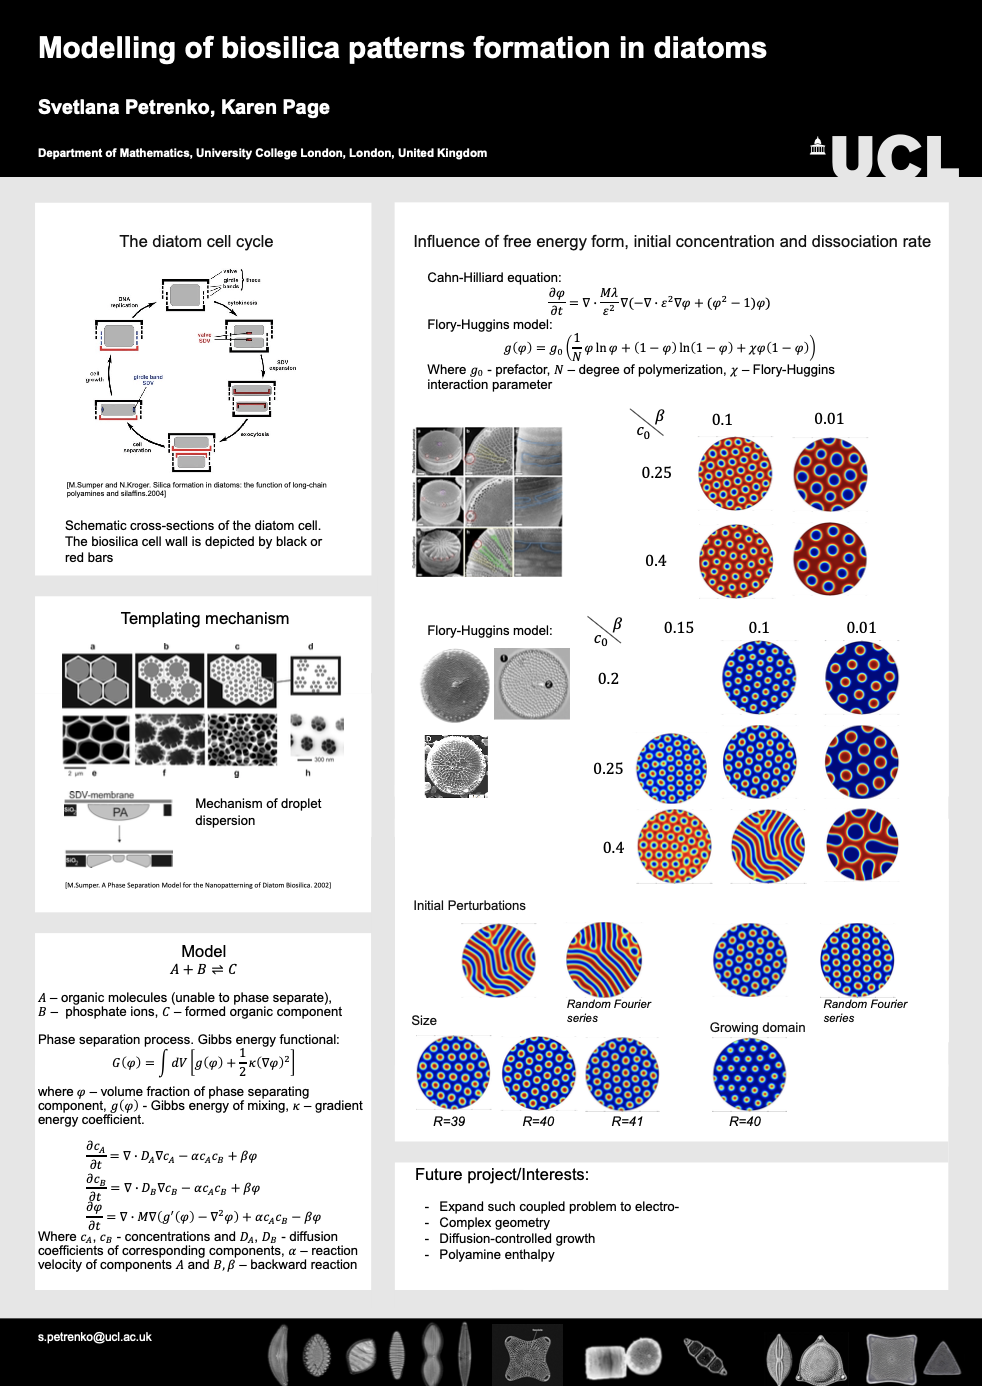 Svetlana Petrenko's prize poster: Influence of the free energy form on modelling of biosilica patterns formation in diatoms